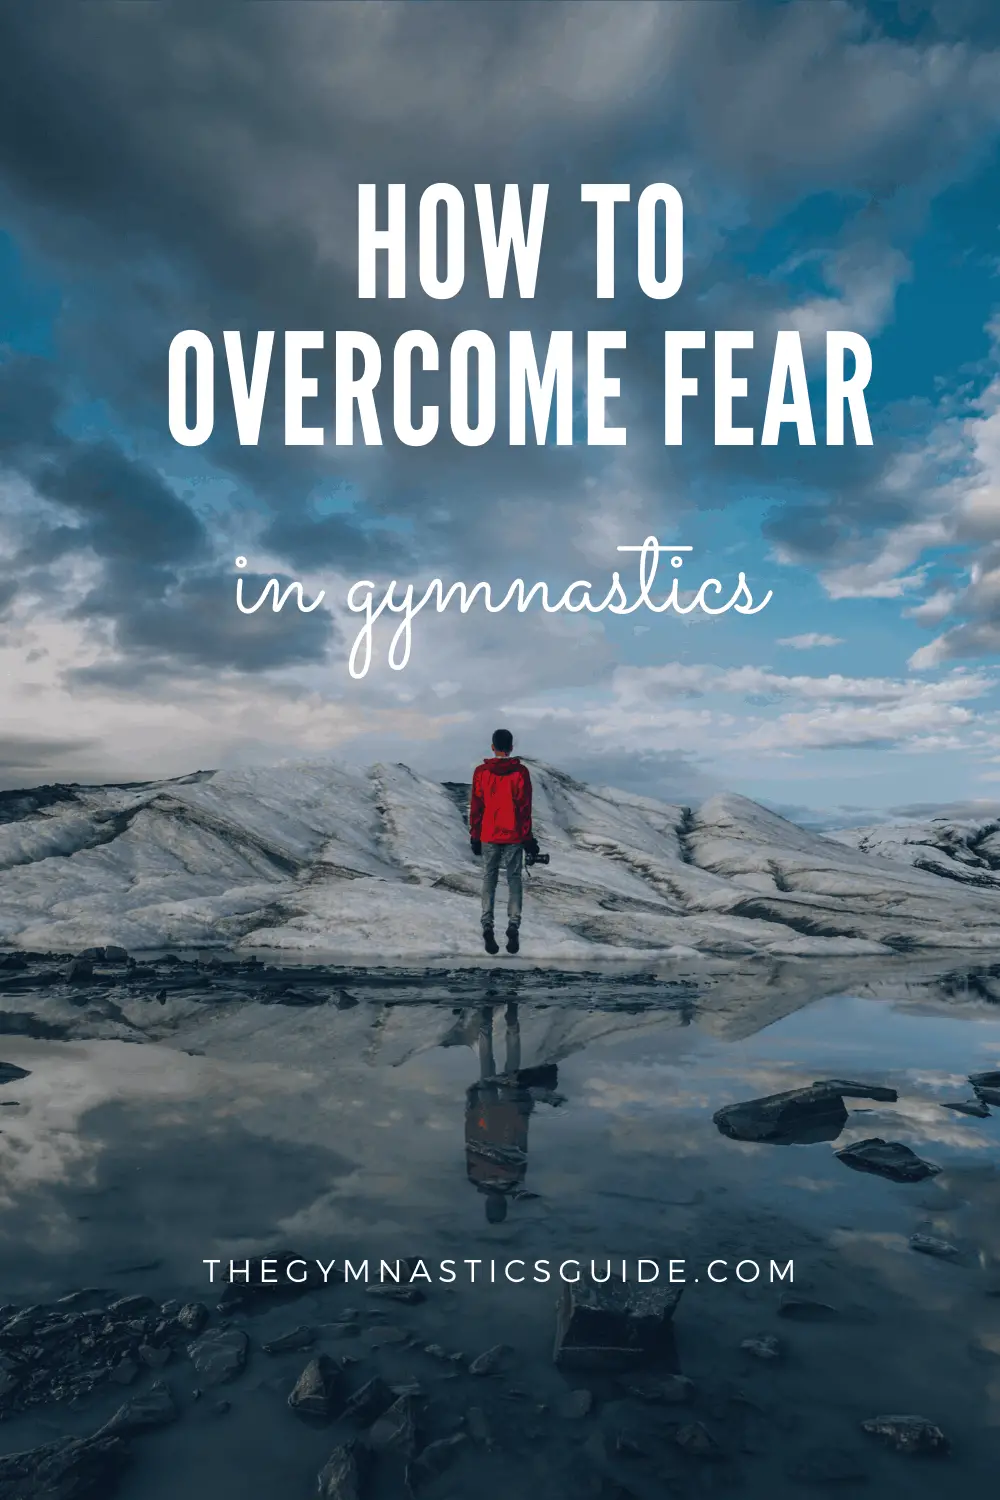 How To Overcome Fear In Gymnastics